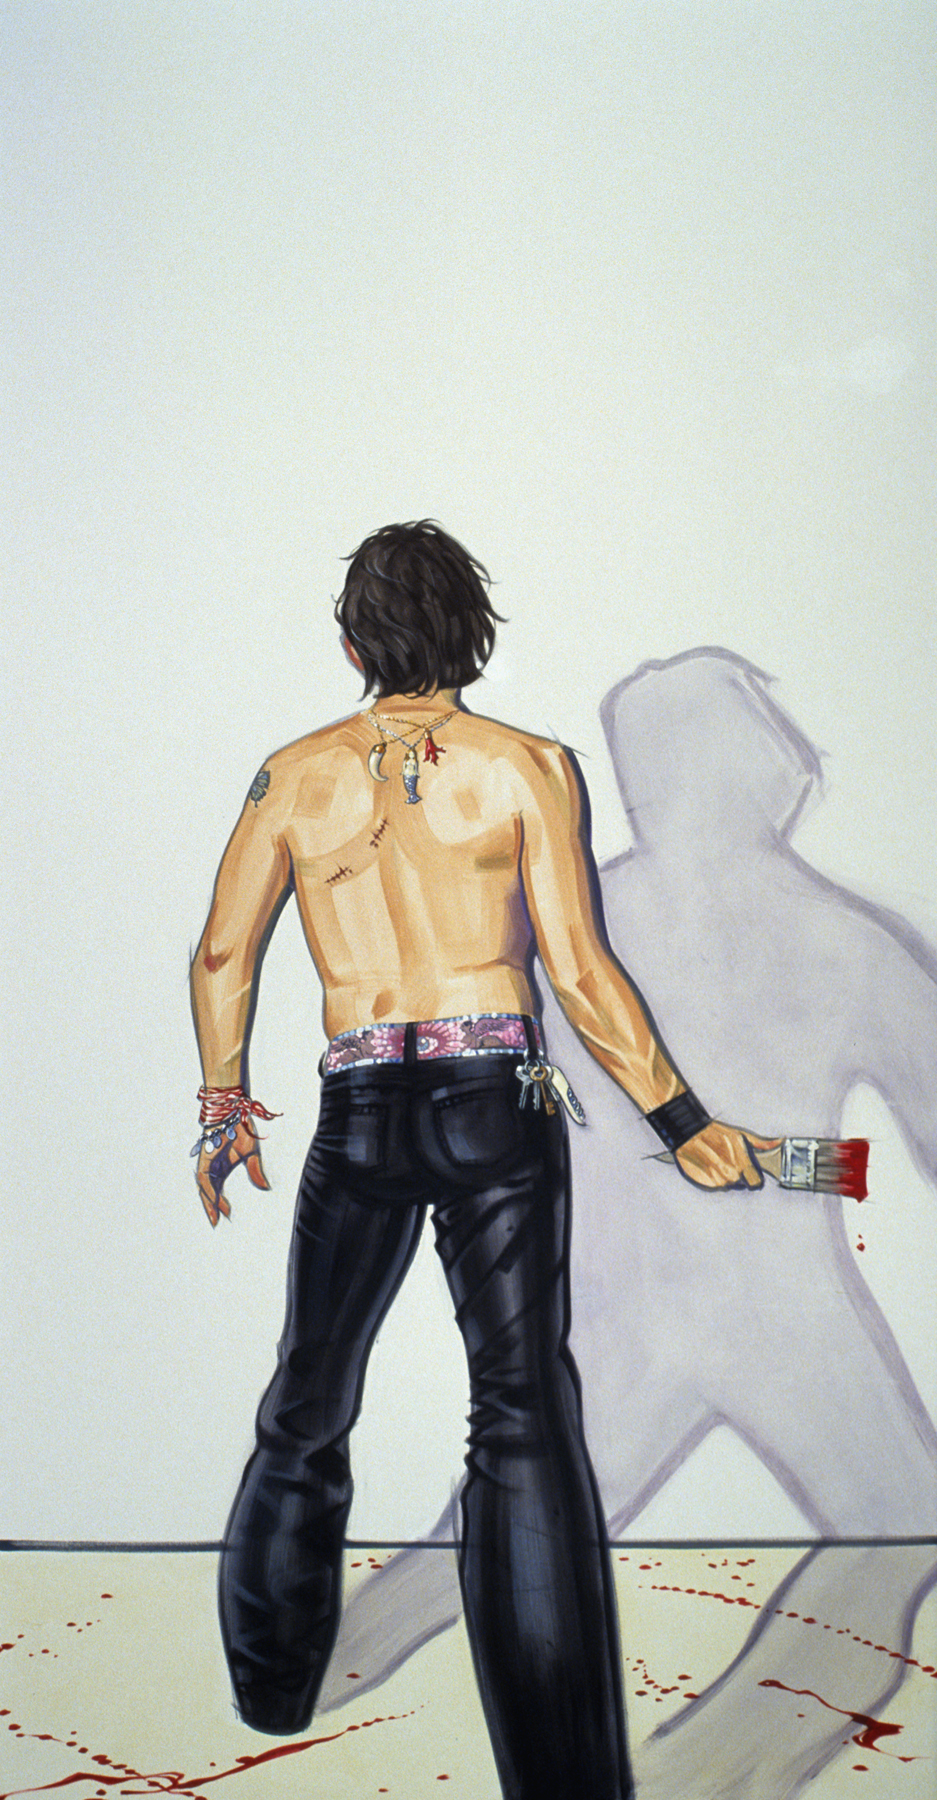 Me and the White Canvas, 2003,  courtesy of Jolene Mechanic, oil on canvas, 95 x 50 inches, by Taiyo la Paix